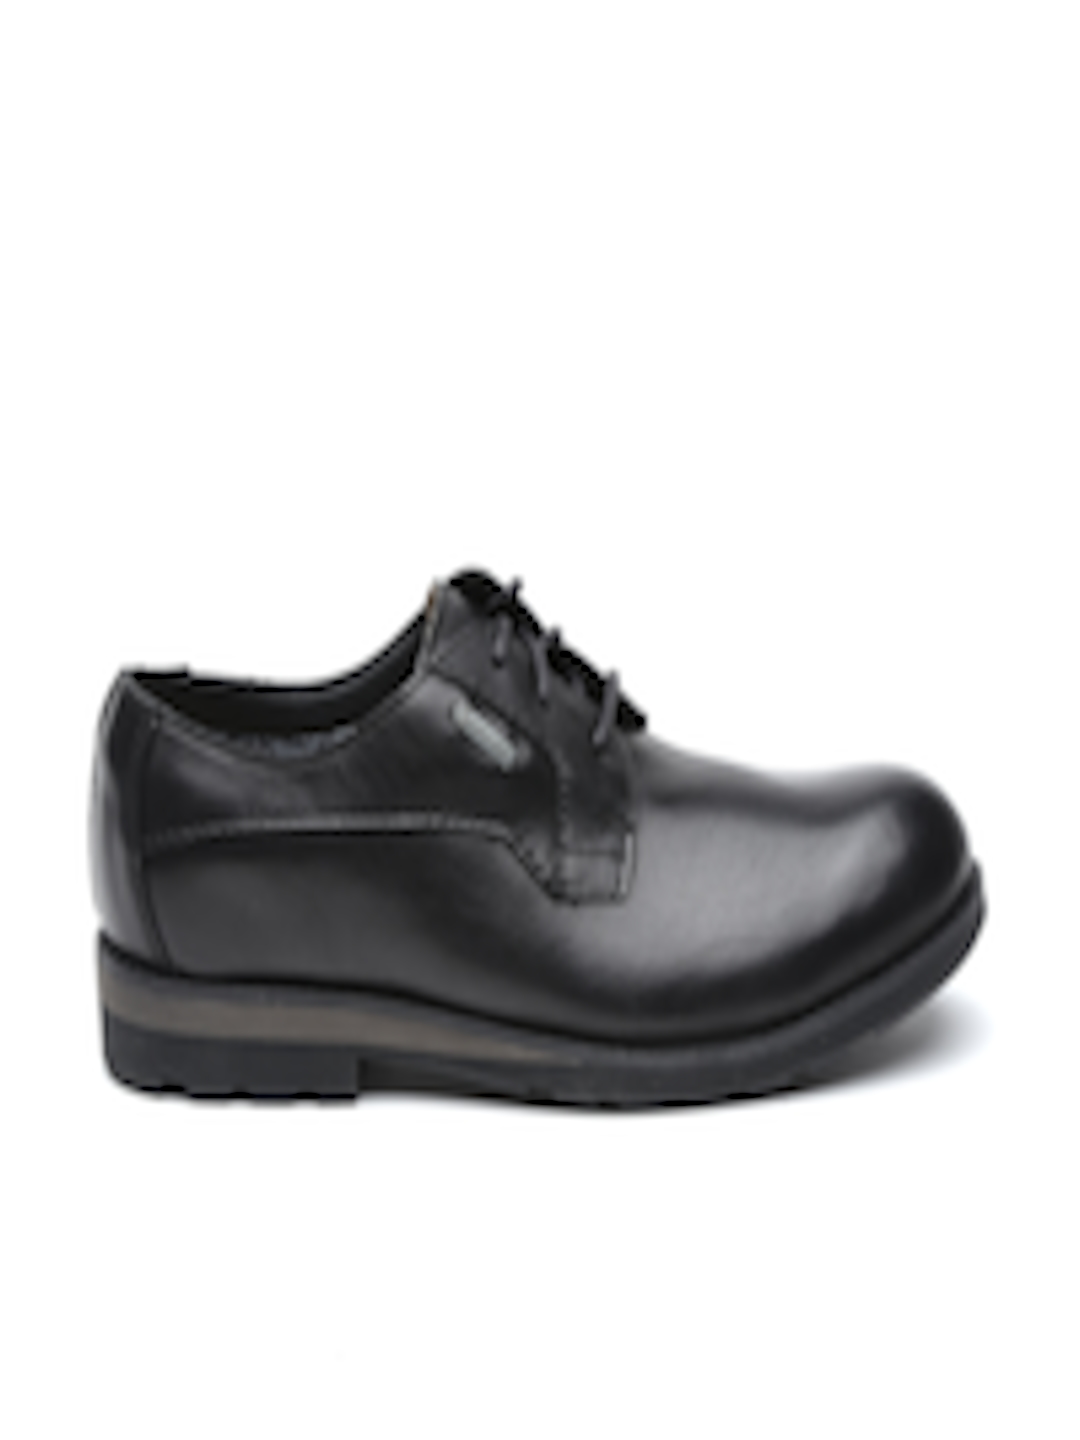 Buy Clarks Men Black Leather Casual Shoes - Casual Shoes for Men ...